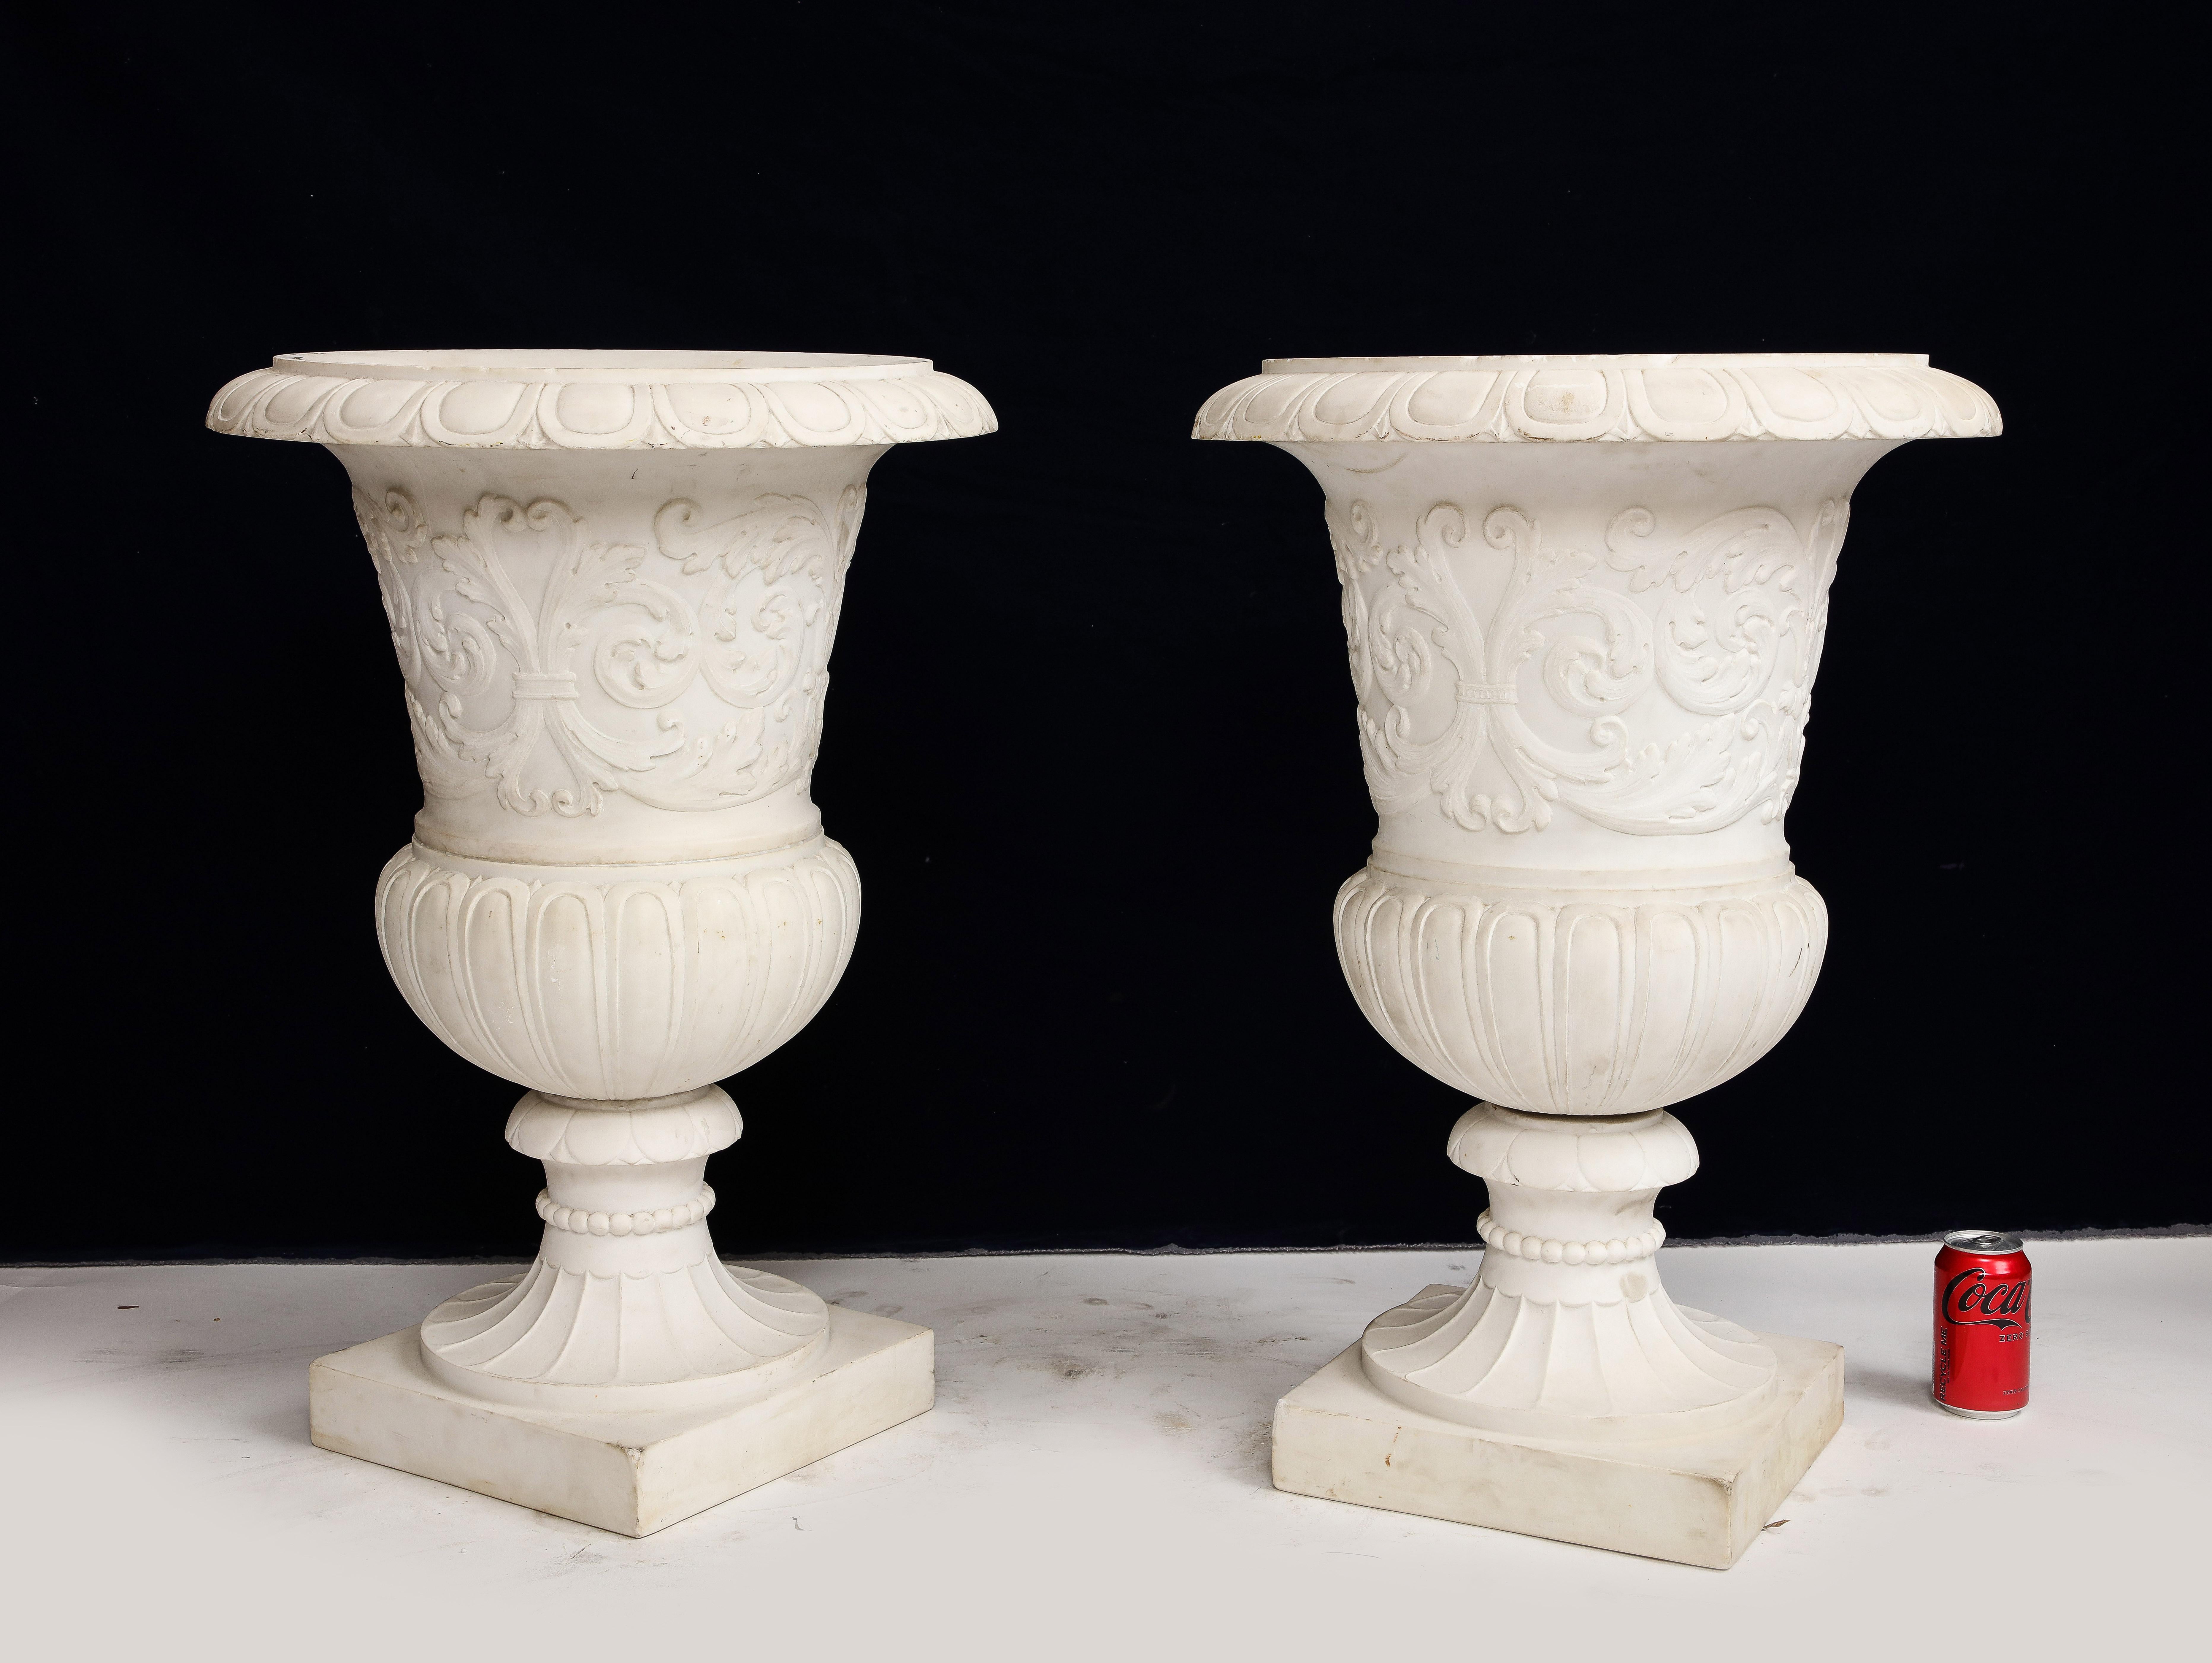 Pair of Italian Carrara Marble Medici Vases w/ Neoclassical Motifs in Relief For Sale 3